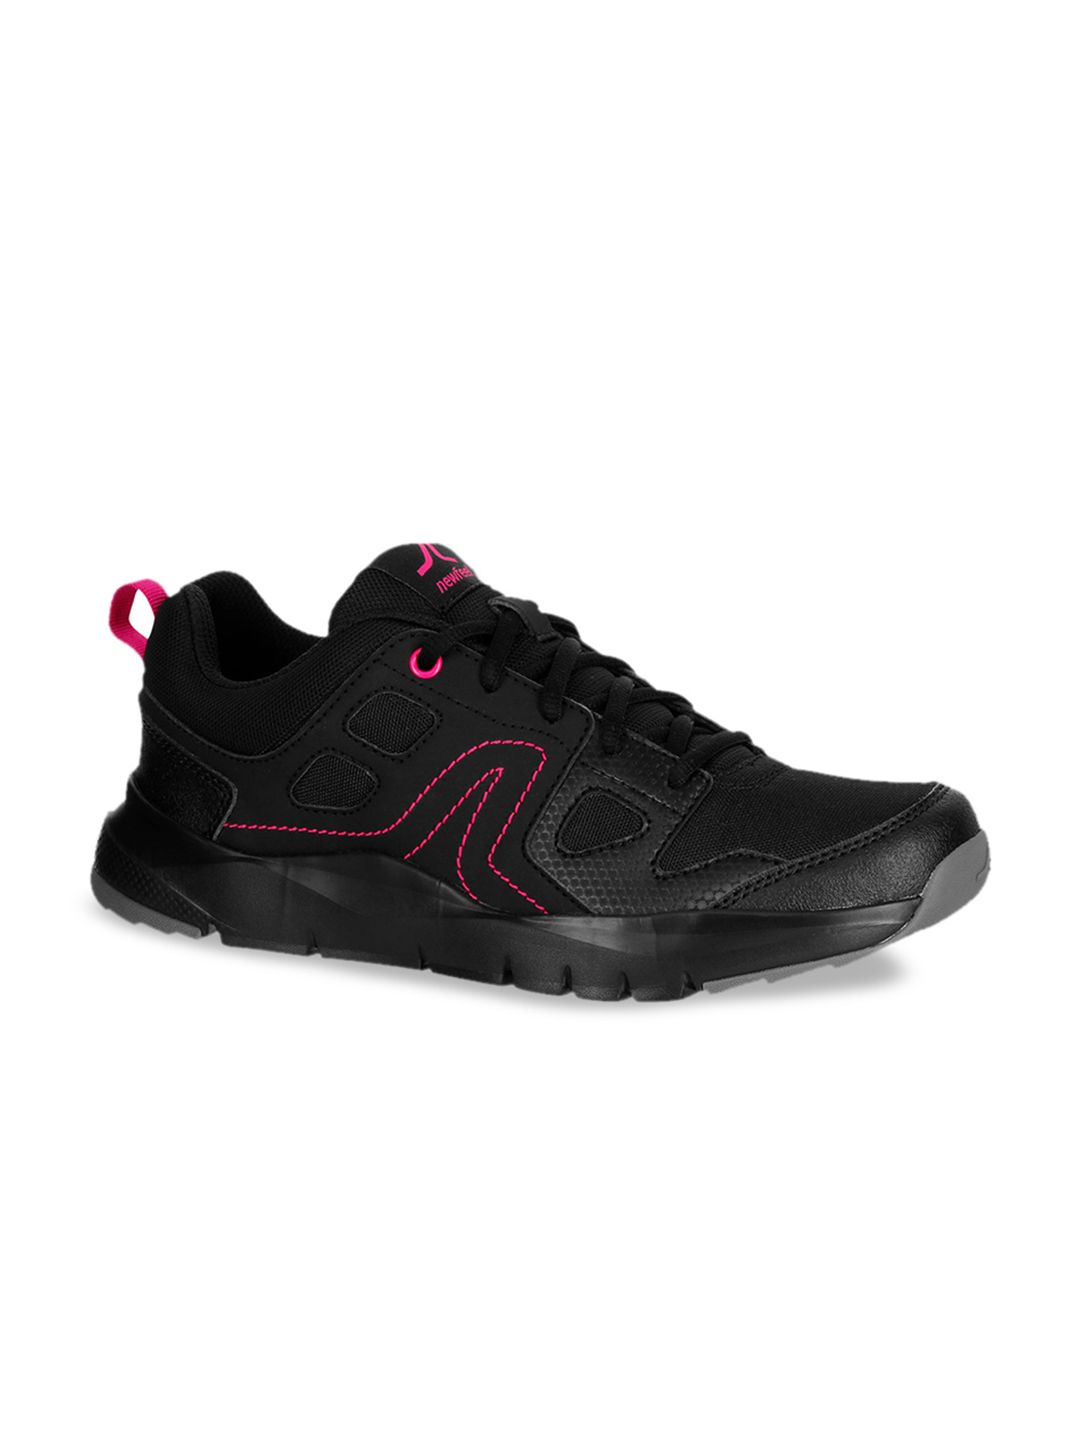 Newfeel By Decathlon Women Black Synthetic Walking Shoes Price in India